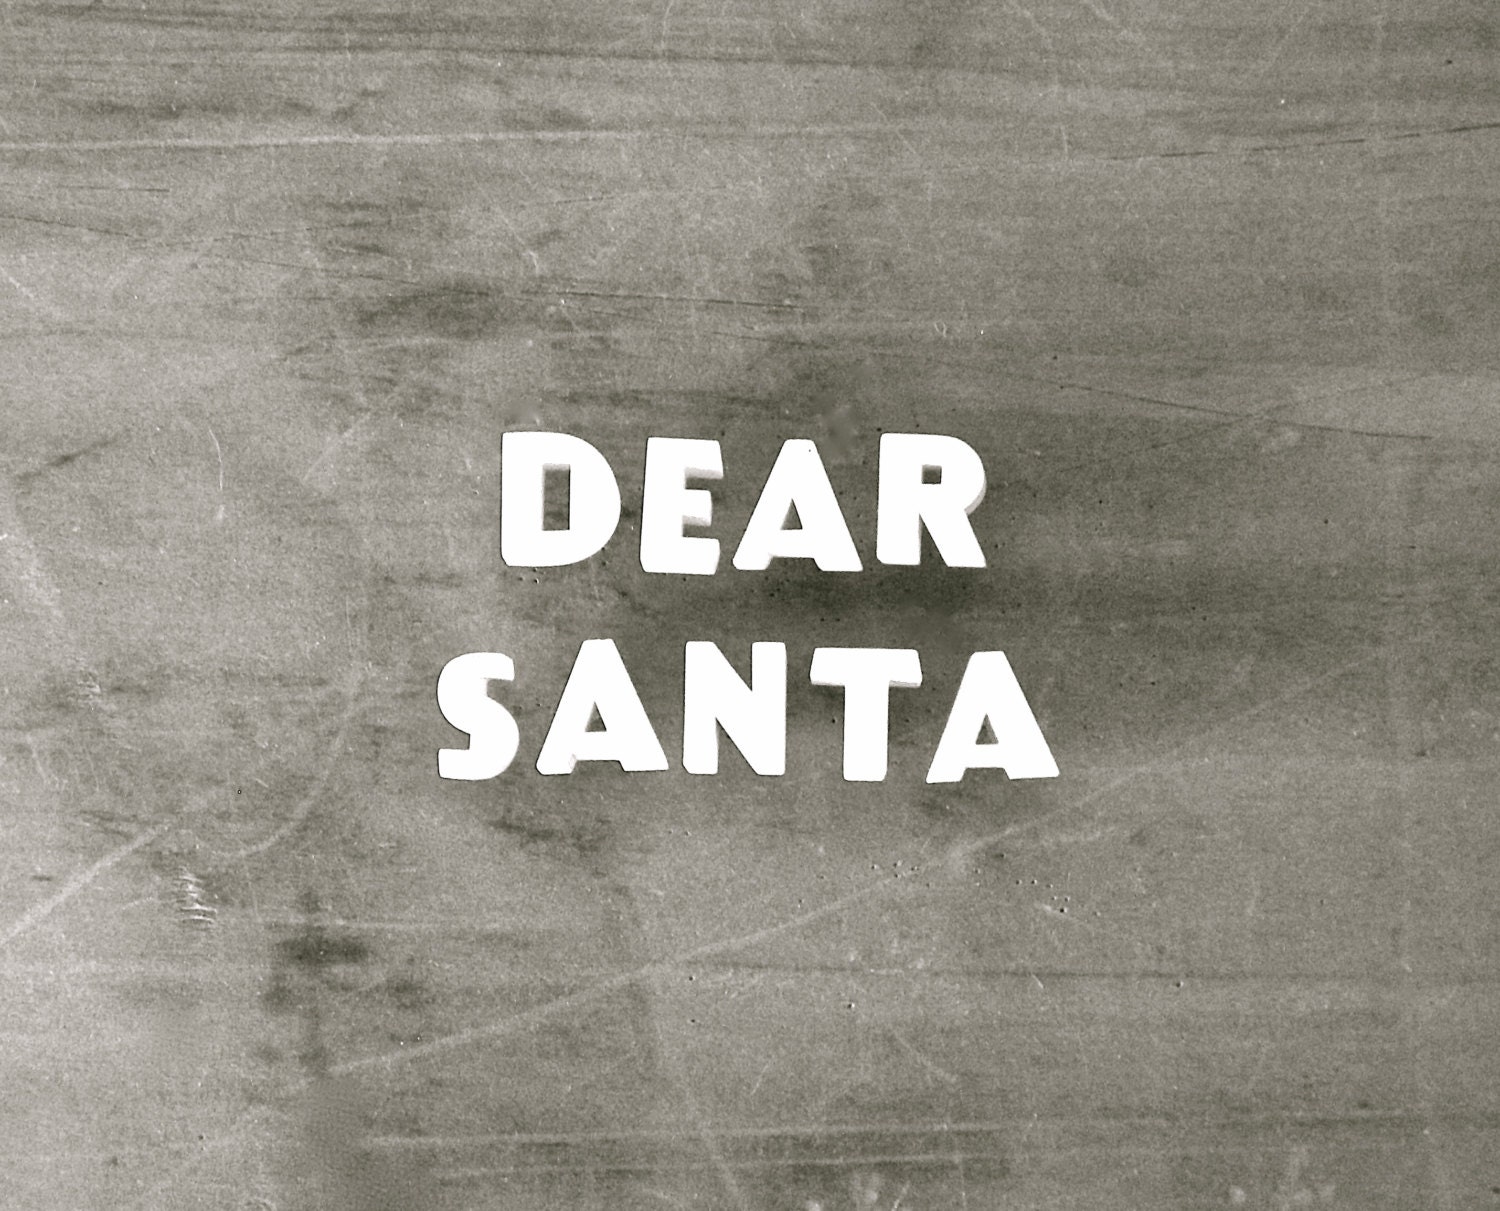 Dear Santa - Vintage Ceramic Push Pin Letters - Sign - Rustic - White - Letters - Supplies - Humor - Kids - Holidays - Winter - Christmas - becaruns